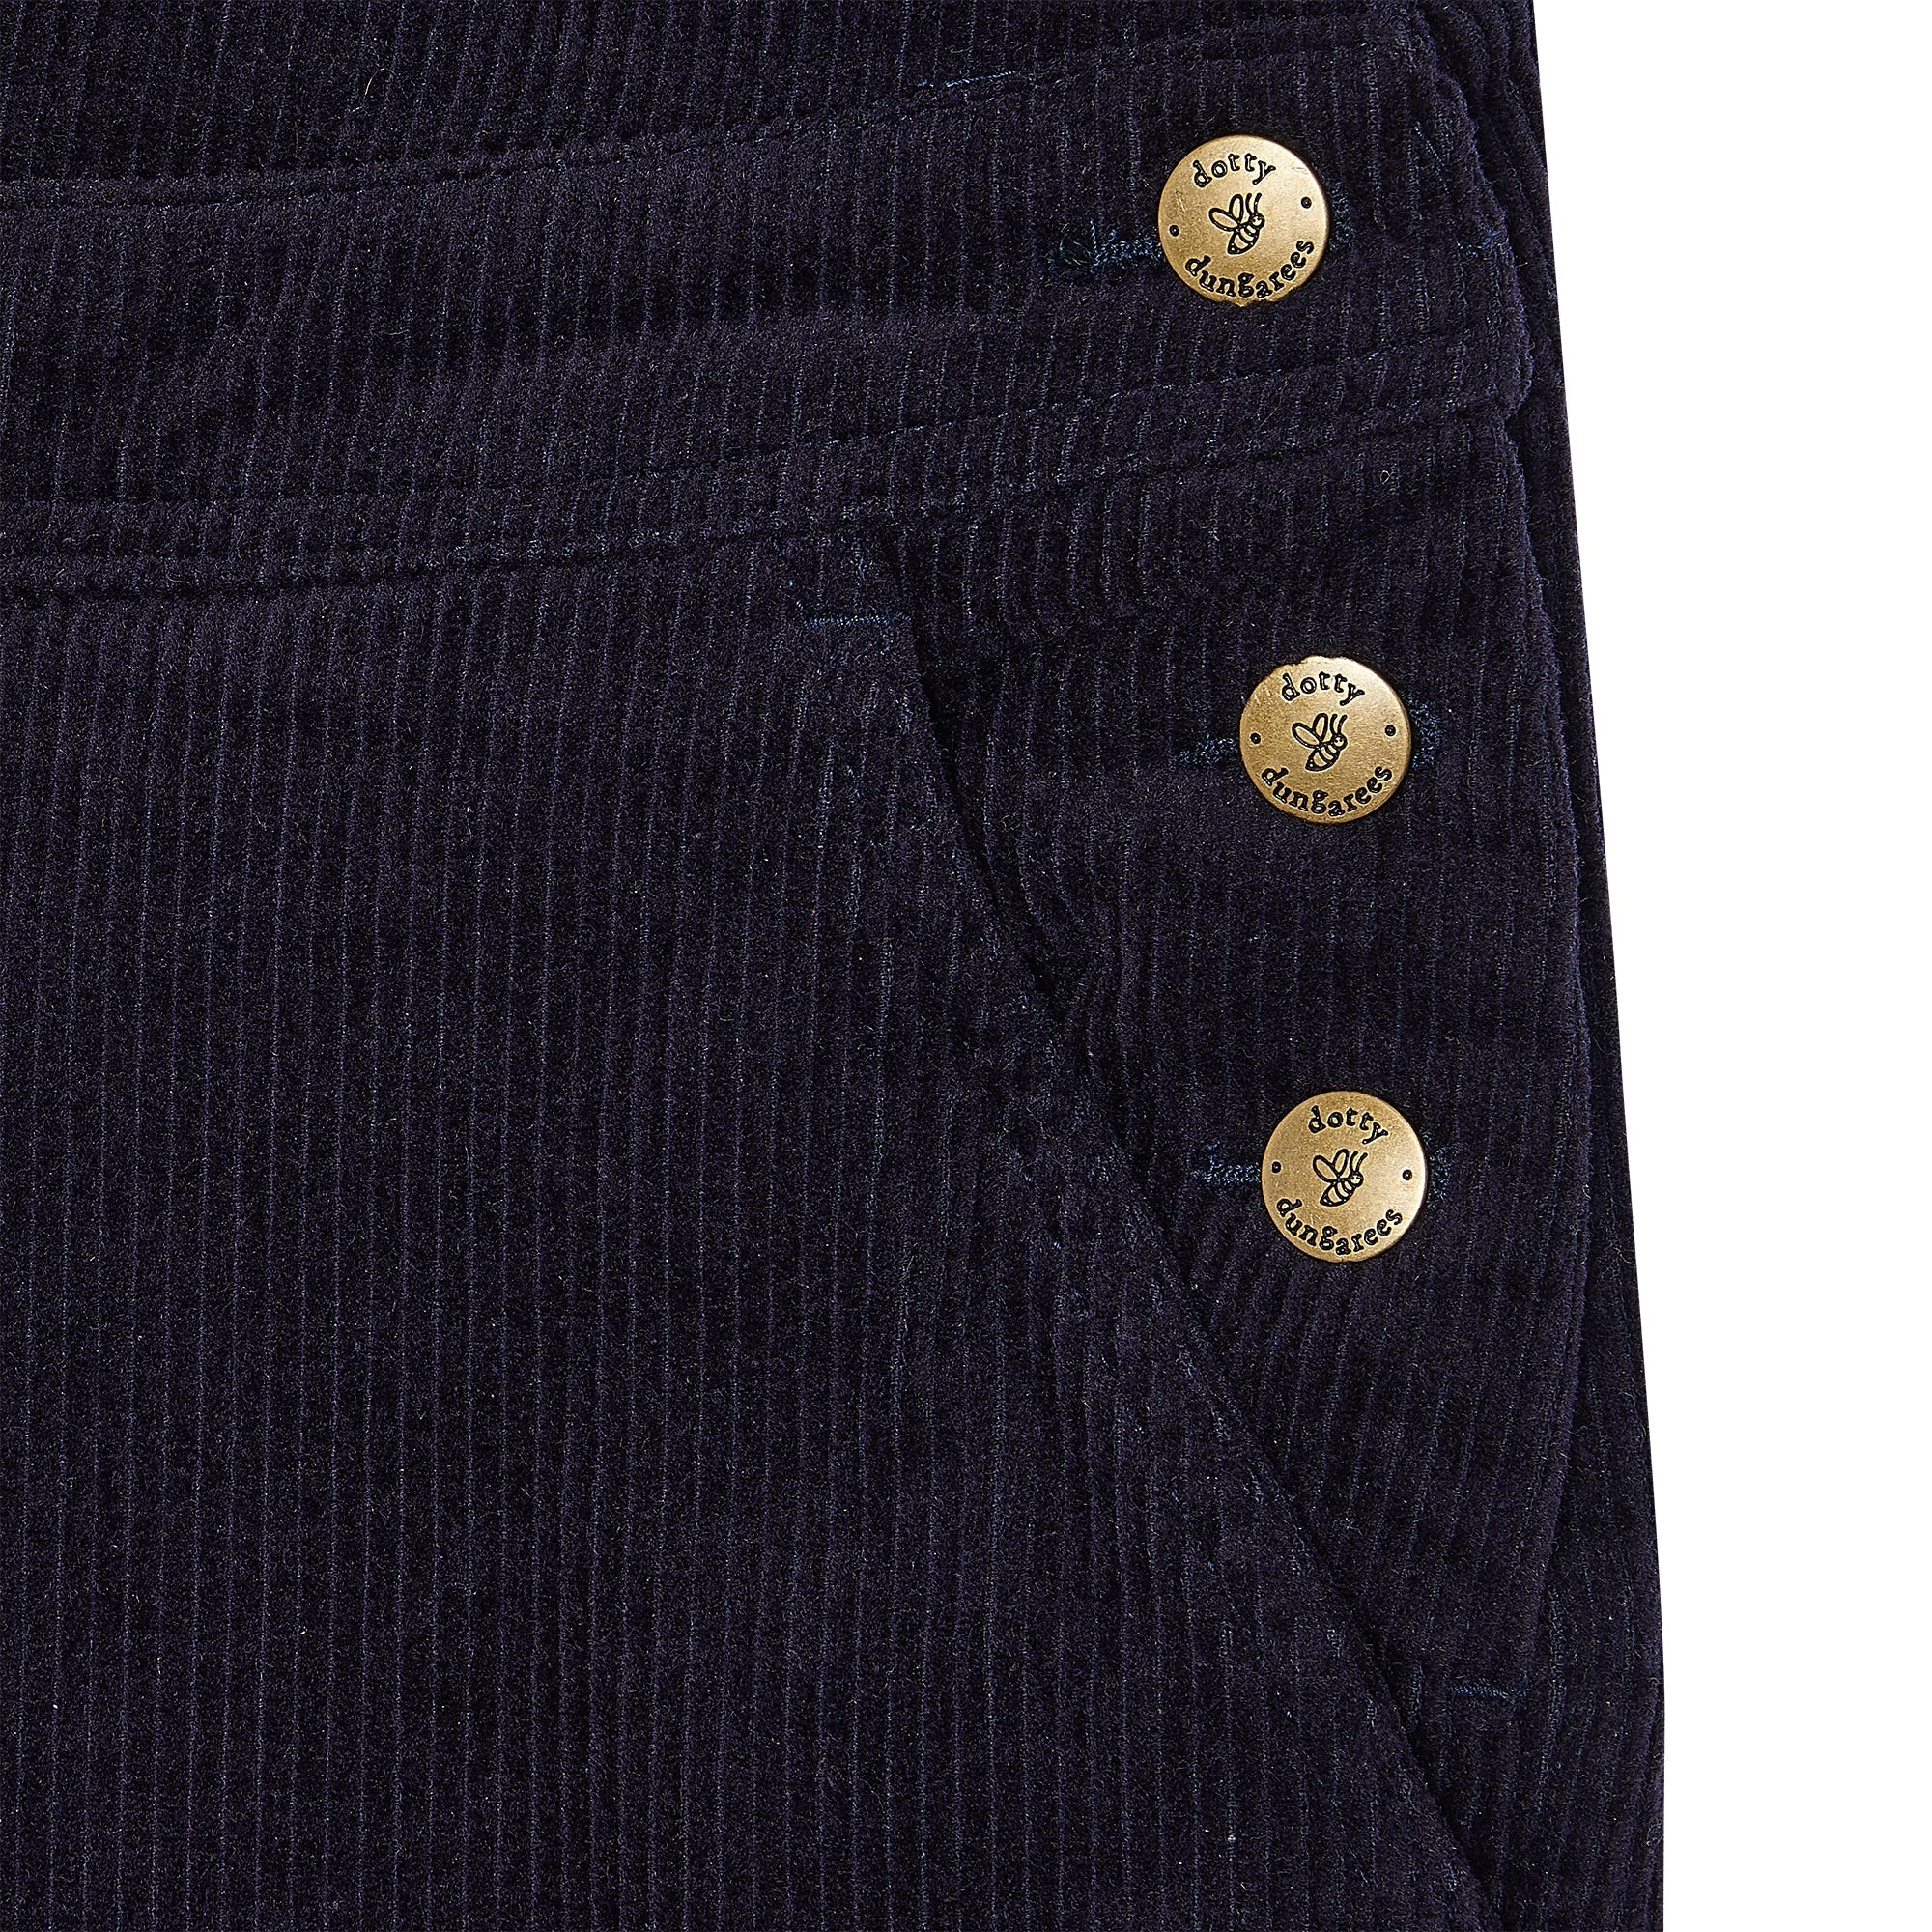 Adult Navy Chunky Cord Dungarees - Dotty Dungarees Ltd